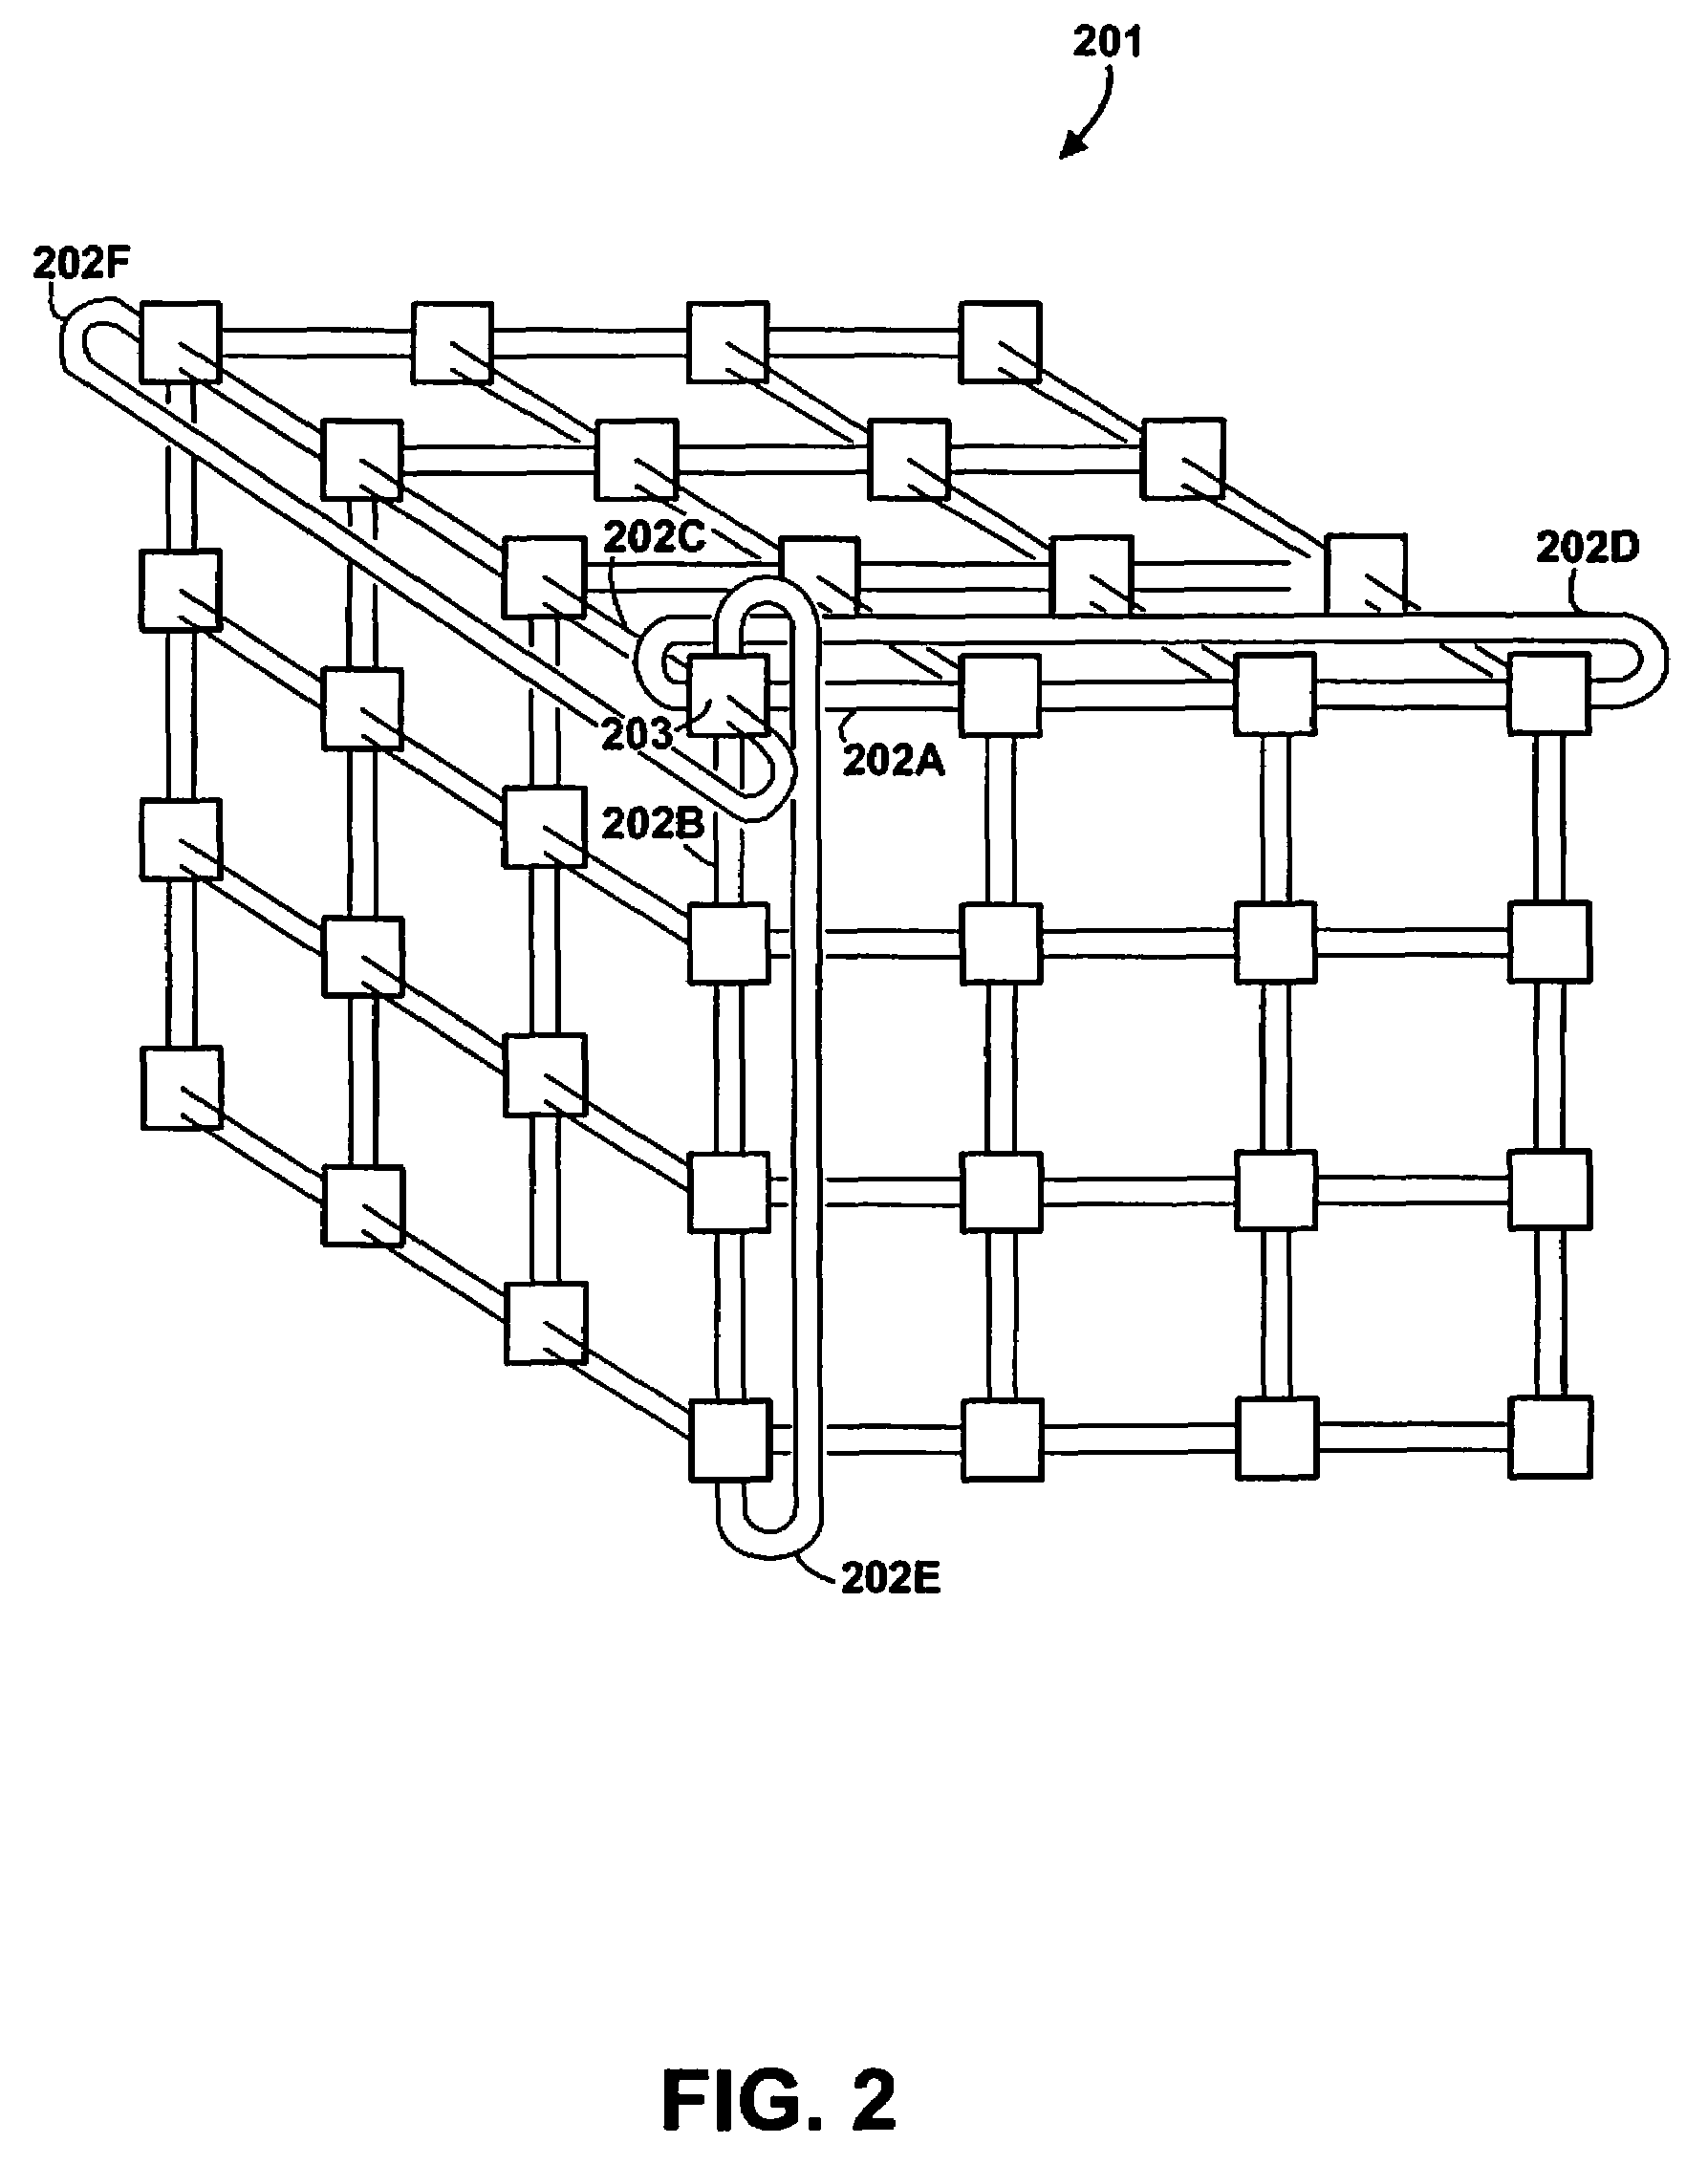 Method and Apparatus for Subdividing Local Memory in Nodes of a Massively Parallel Computer System